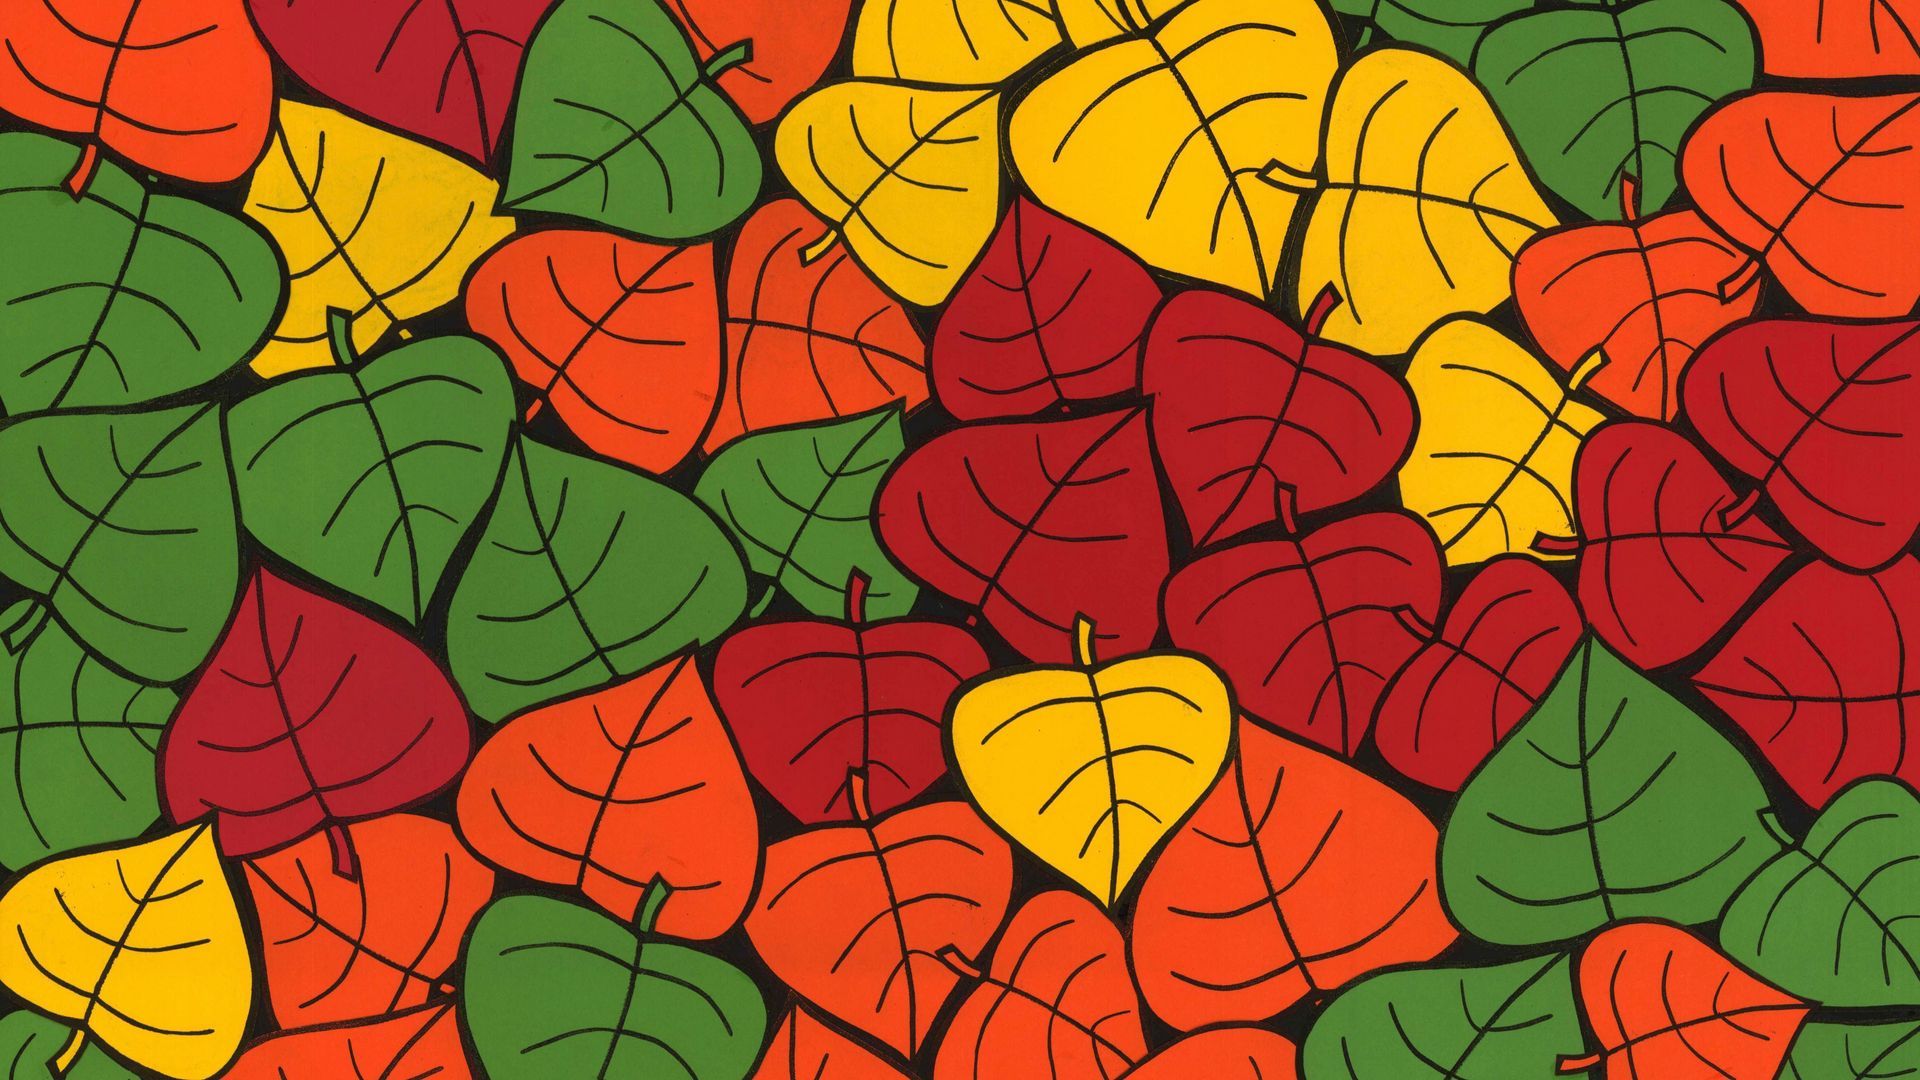 Download wallpaper 1920x1080 leaves, art, colorful, autumn, collage full hd, hdtv, fhd, 1080p HD background